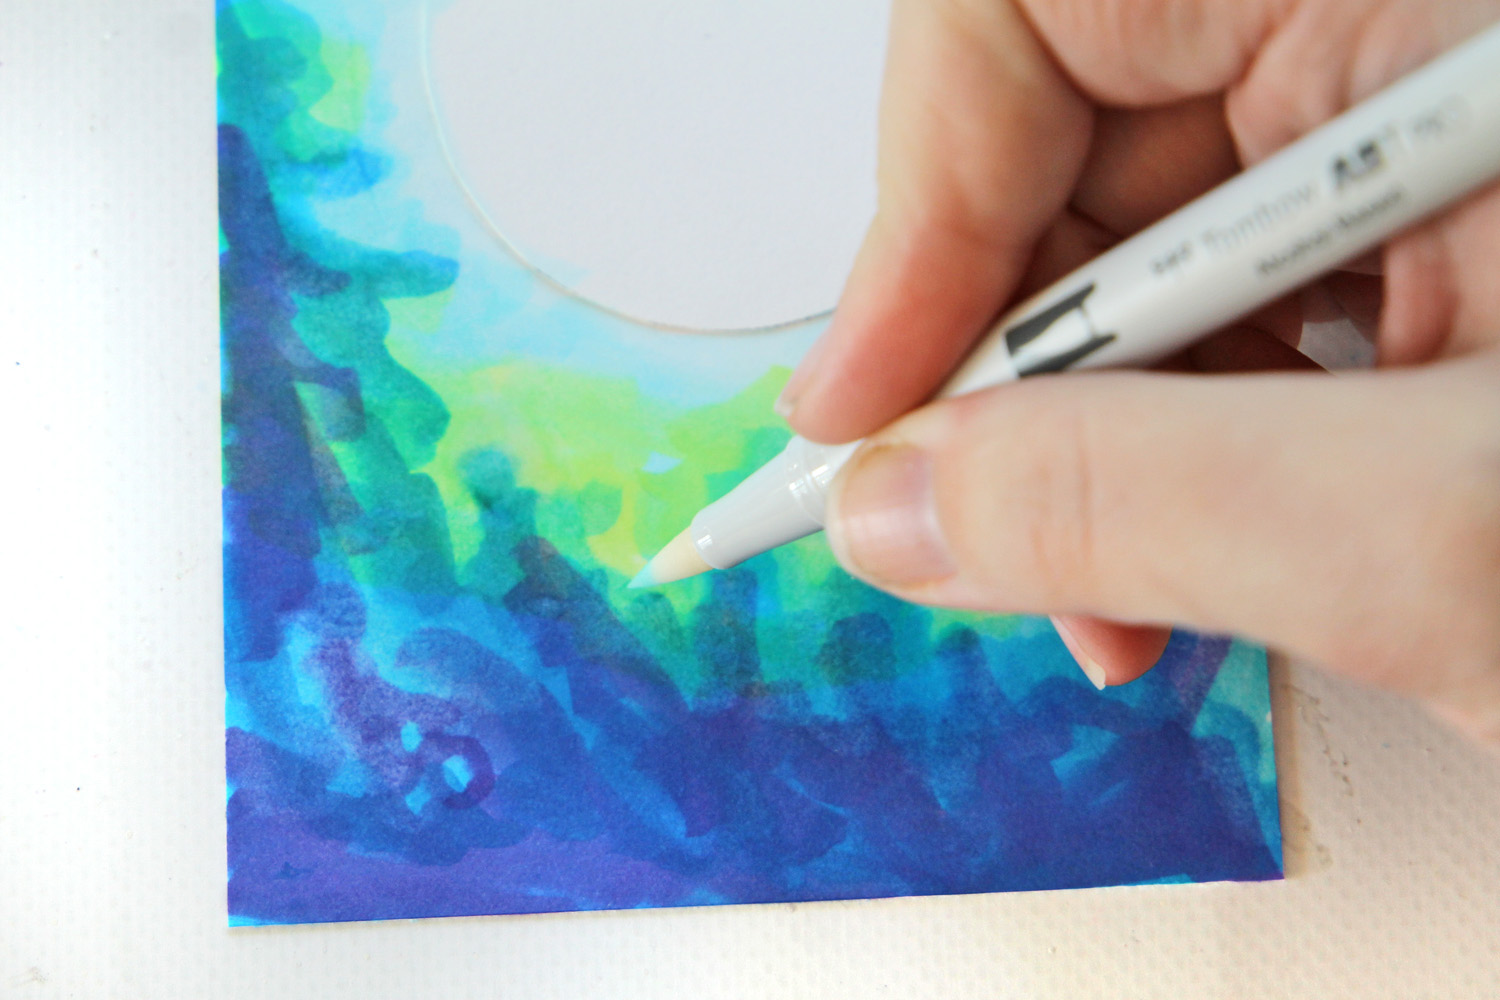 Learn how to color a galaxy using @tombowusa ABT PRO Markers and create your own fun Space card! tutorial by @studiokatie on the #tombowusa blog. #tombow #galaxy #cardmaking